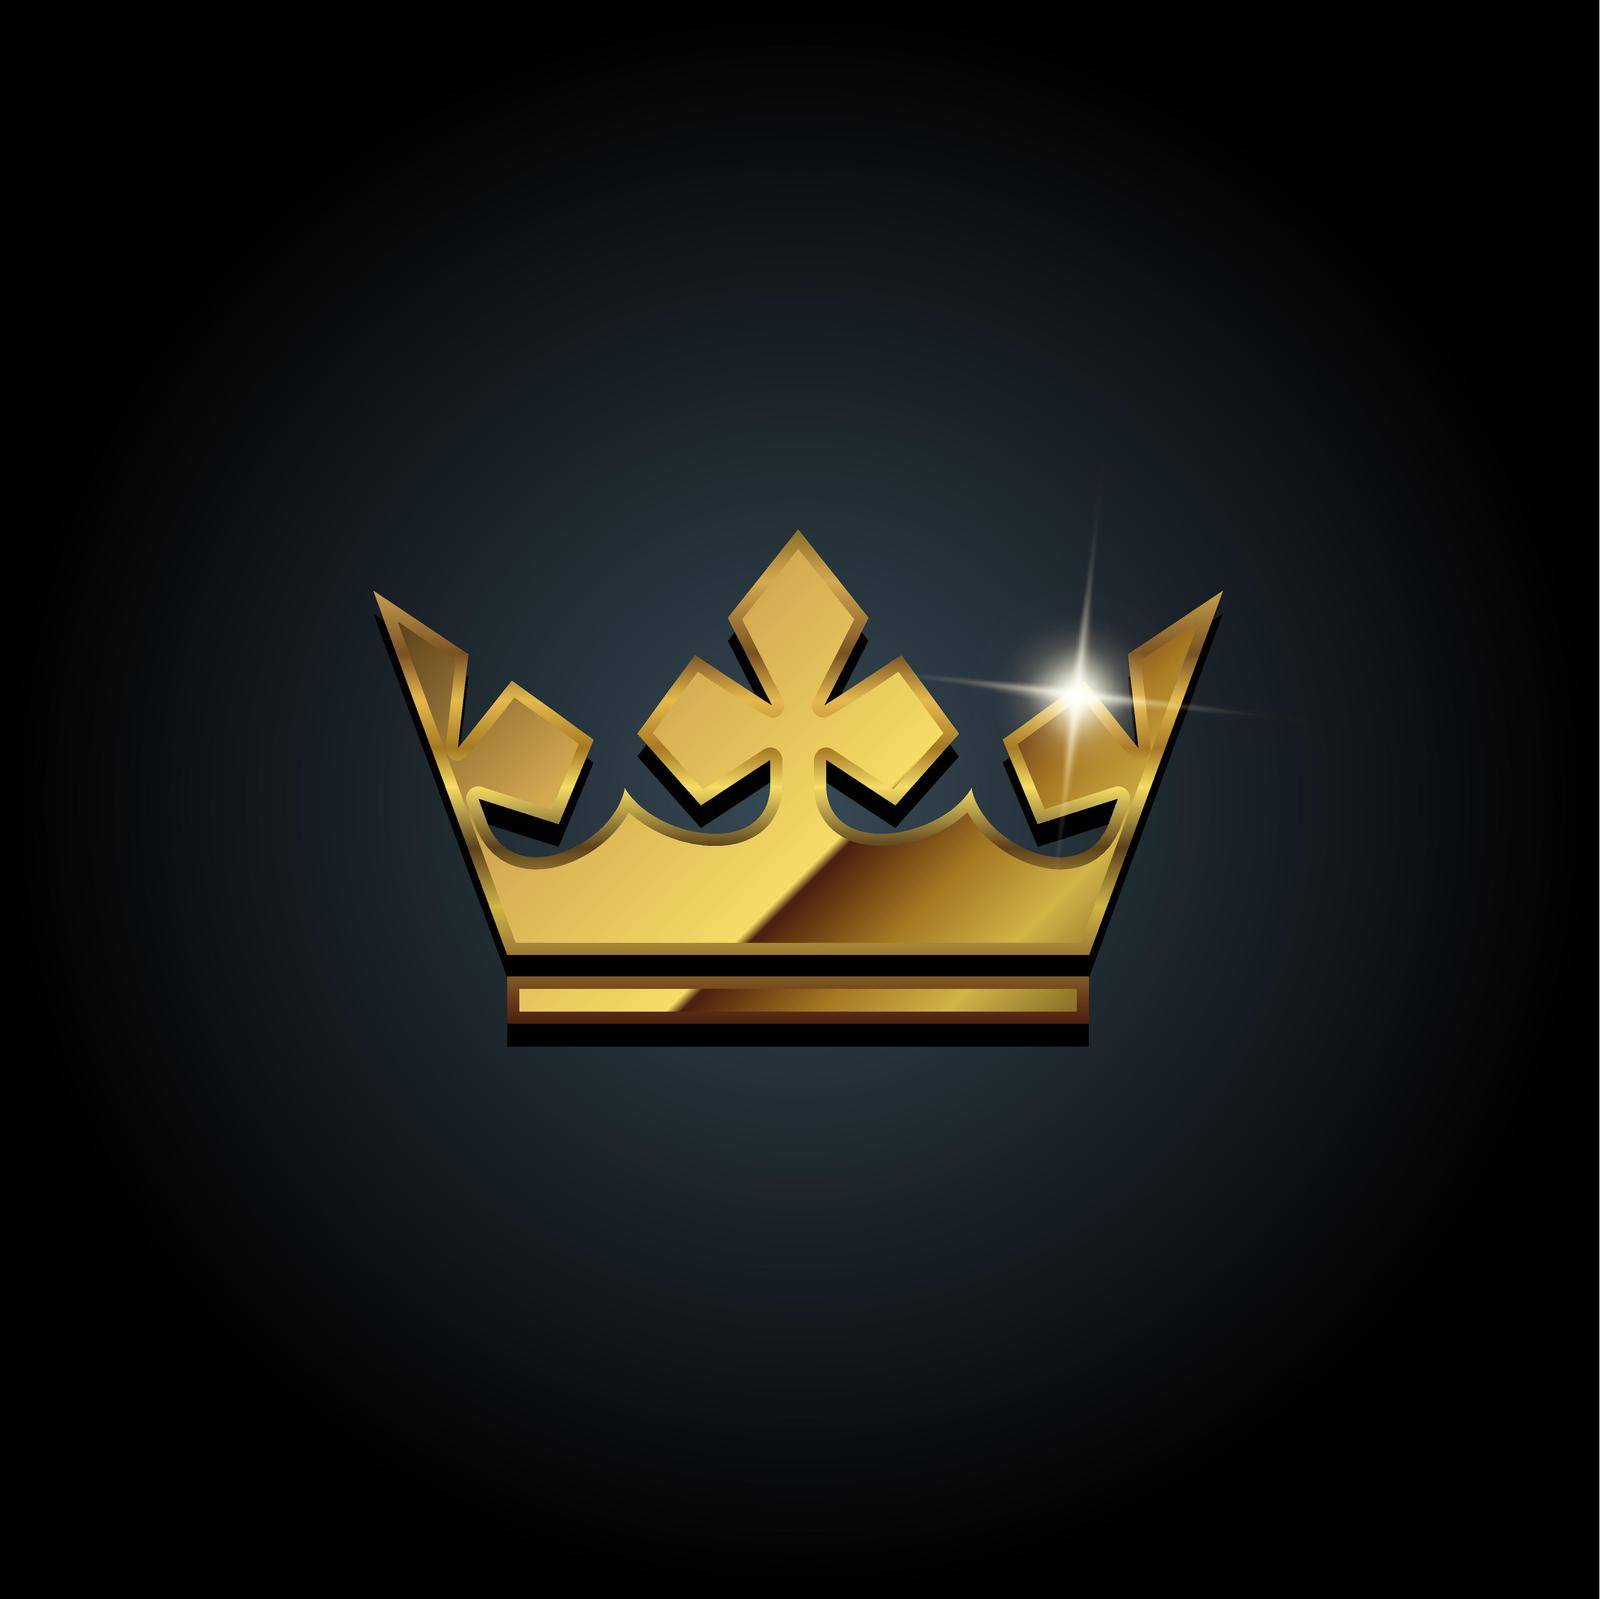 Golden metalic crown icon illustration by barks